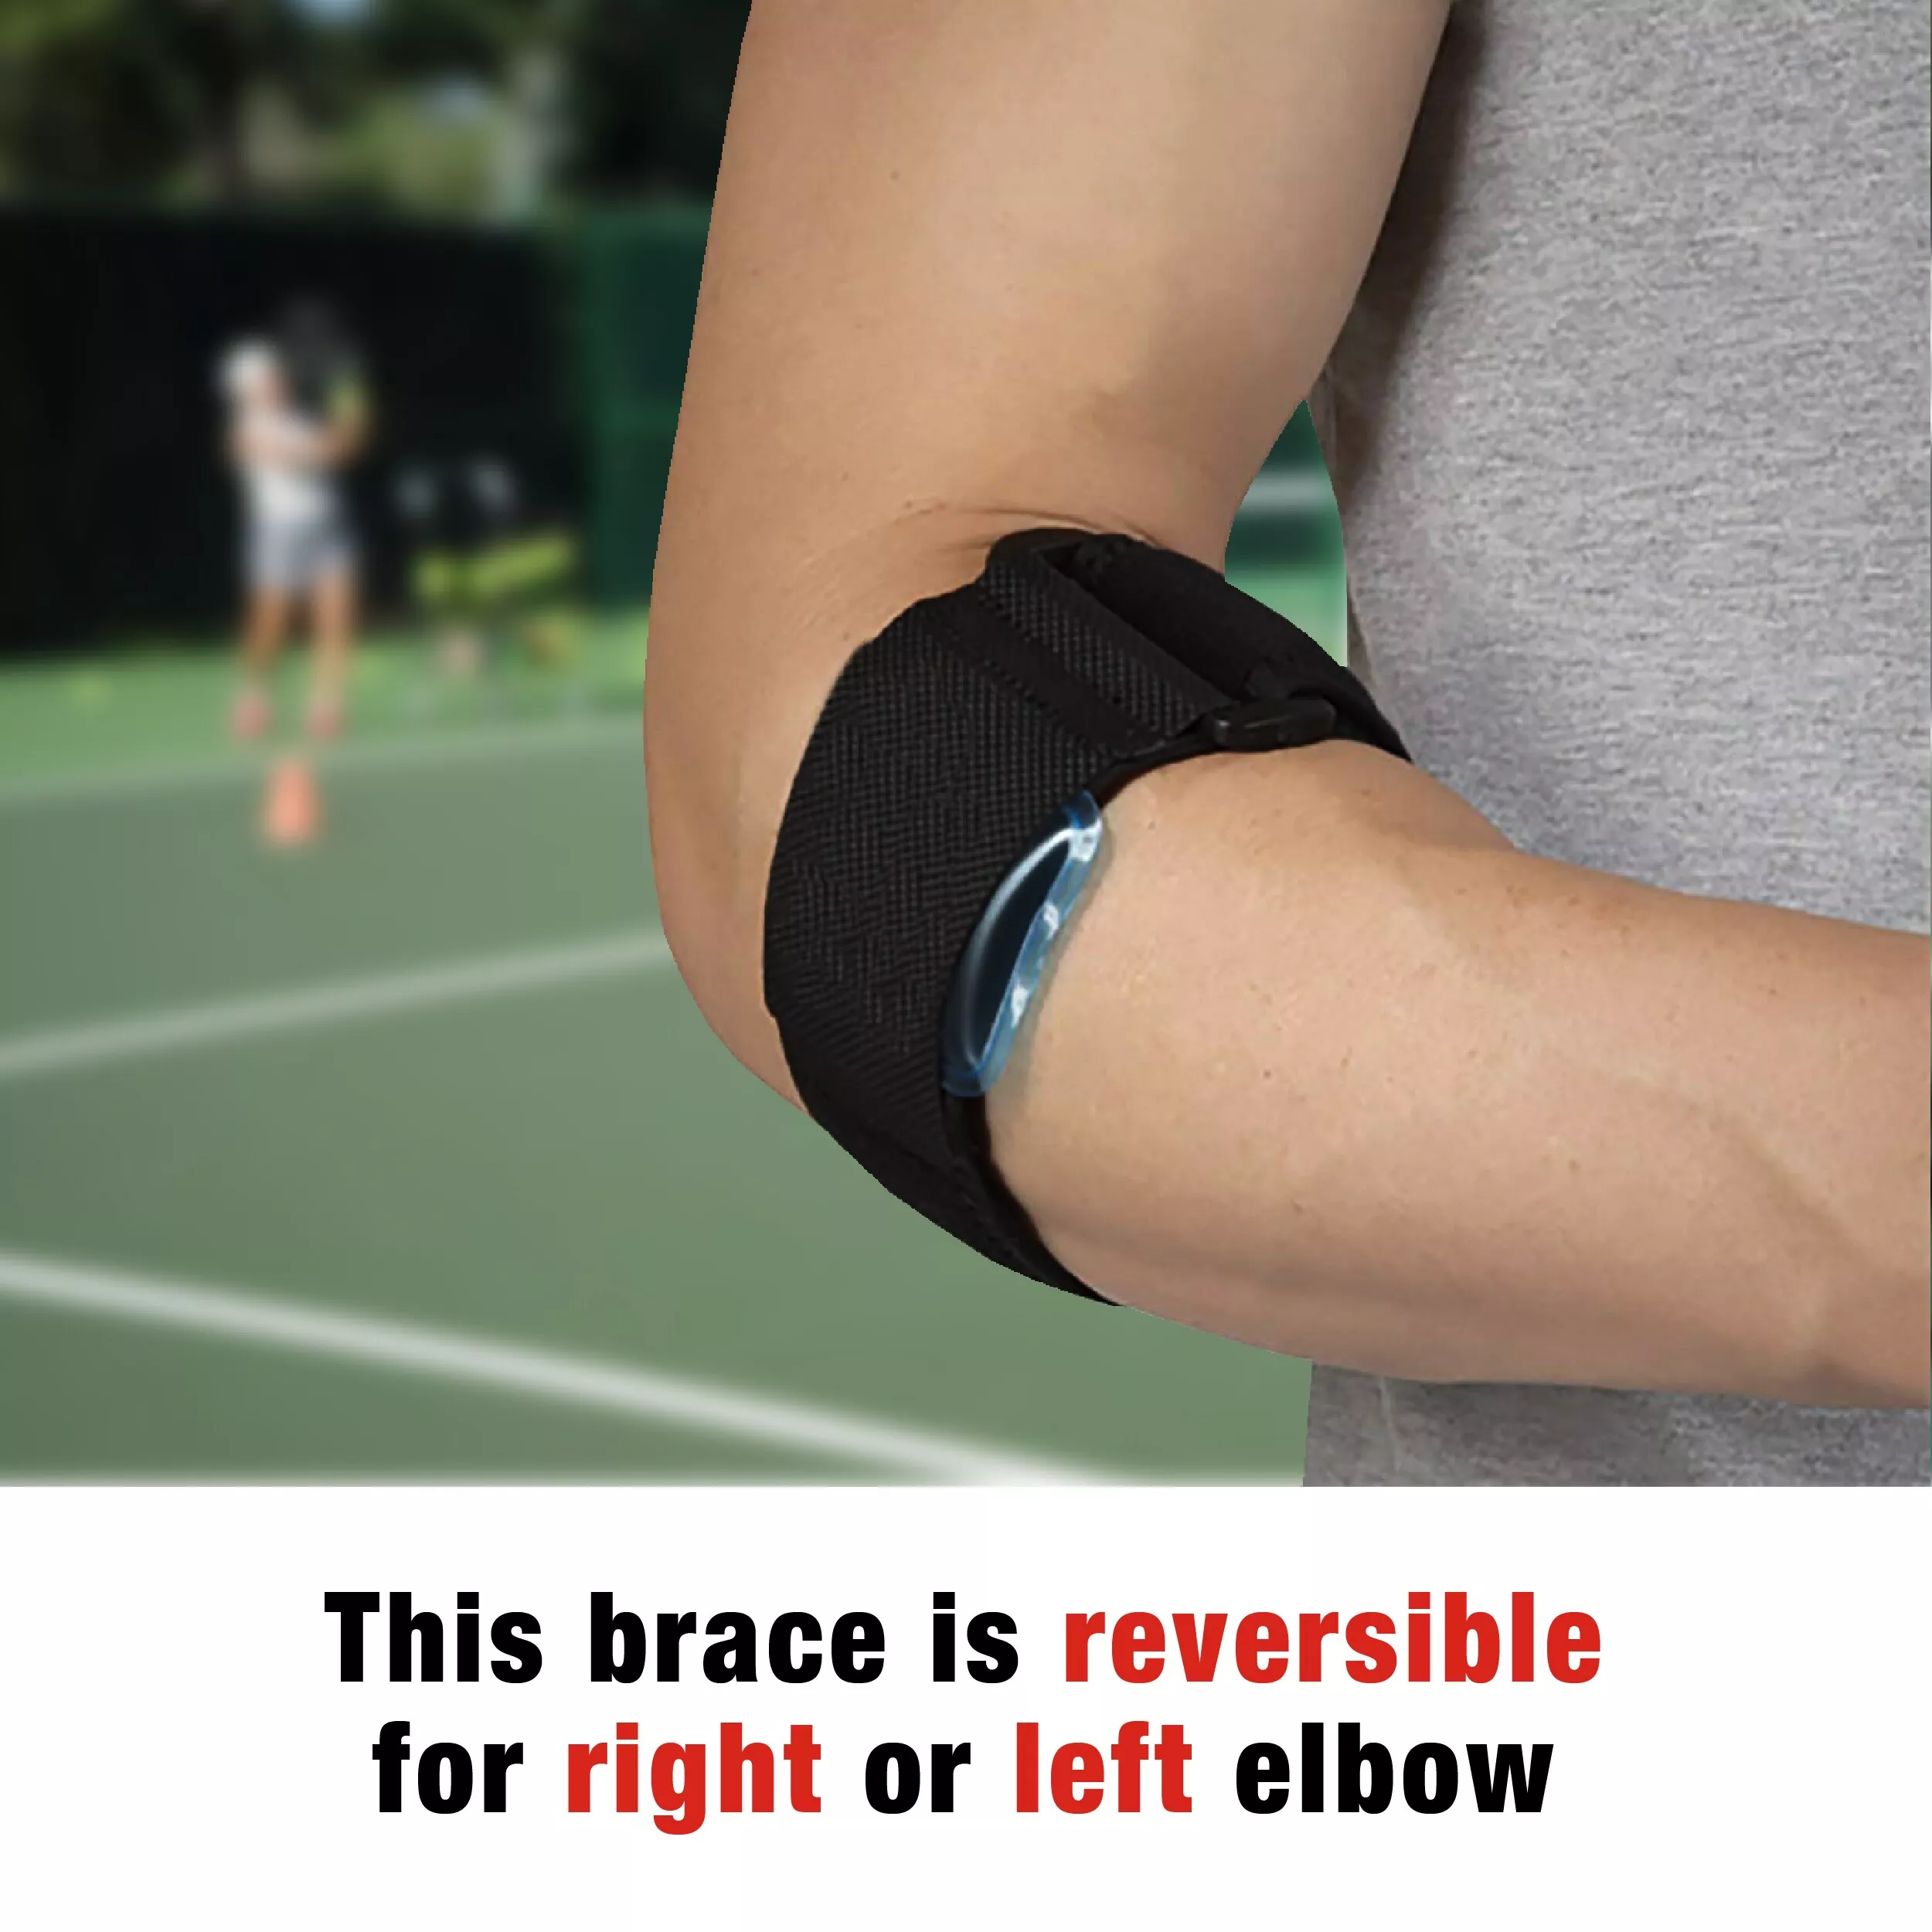 SKU 7010314382 | ACE™ Tennis Elbow Support 205323 